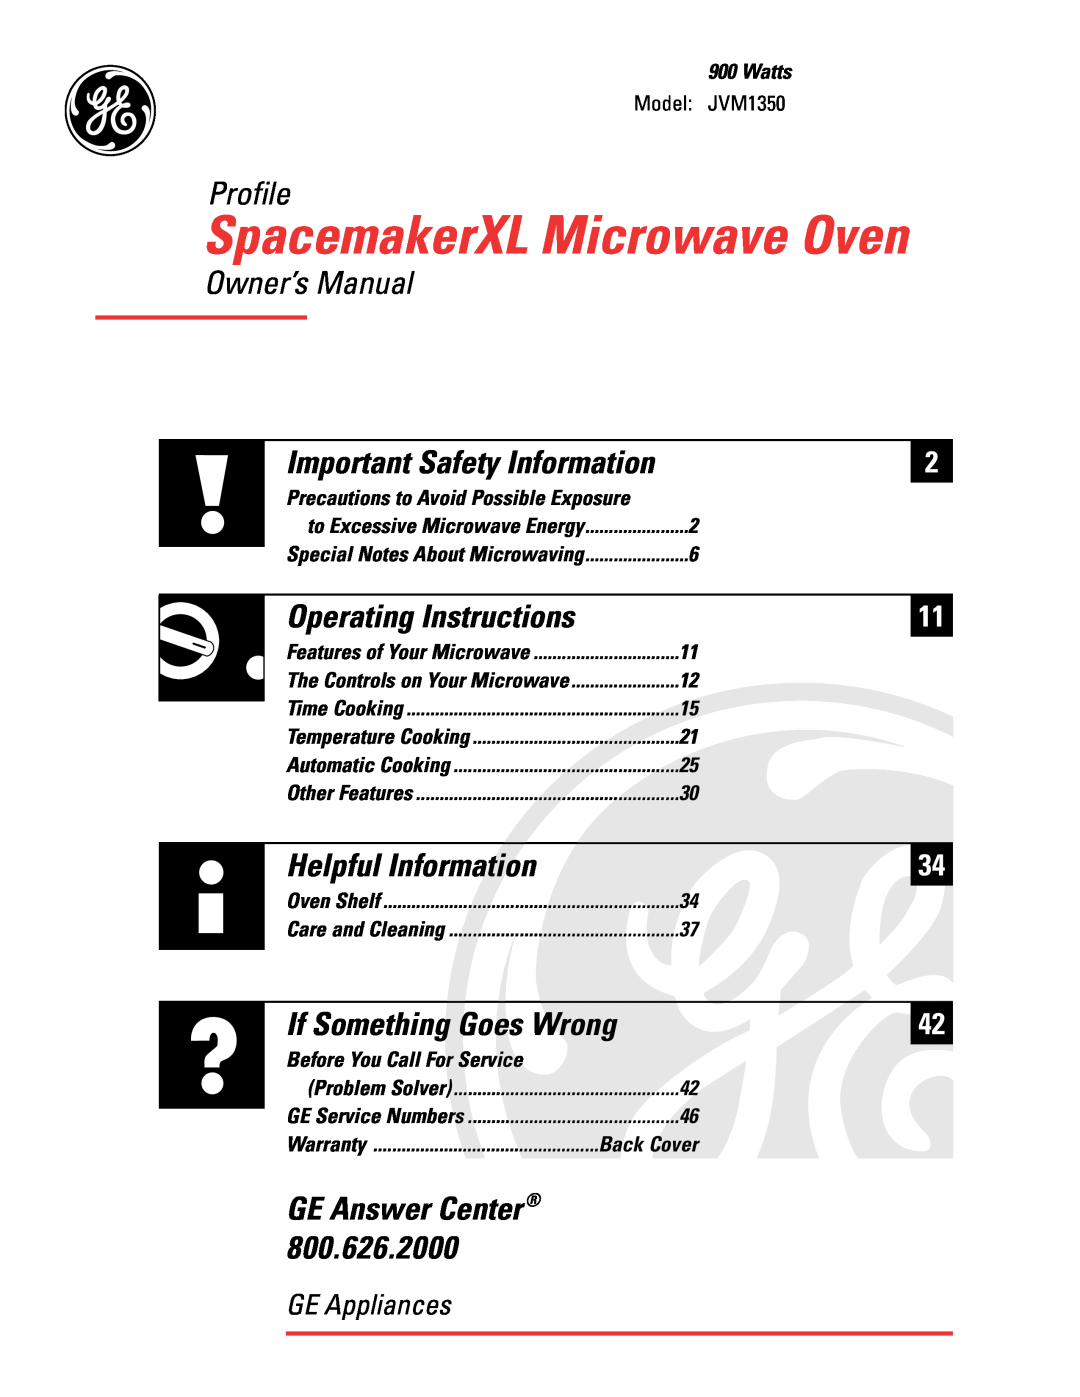 GE 164D2966P212 warranty SpacemakerXL Microwave Oven, Profile, Operating Instructions, Helpful Information, GE Appliances 